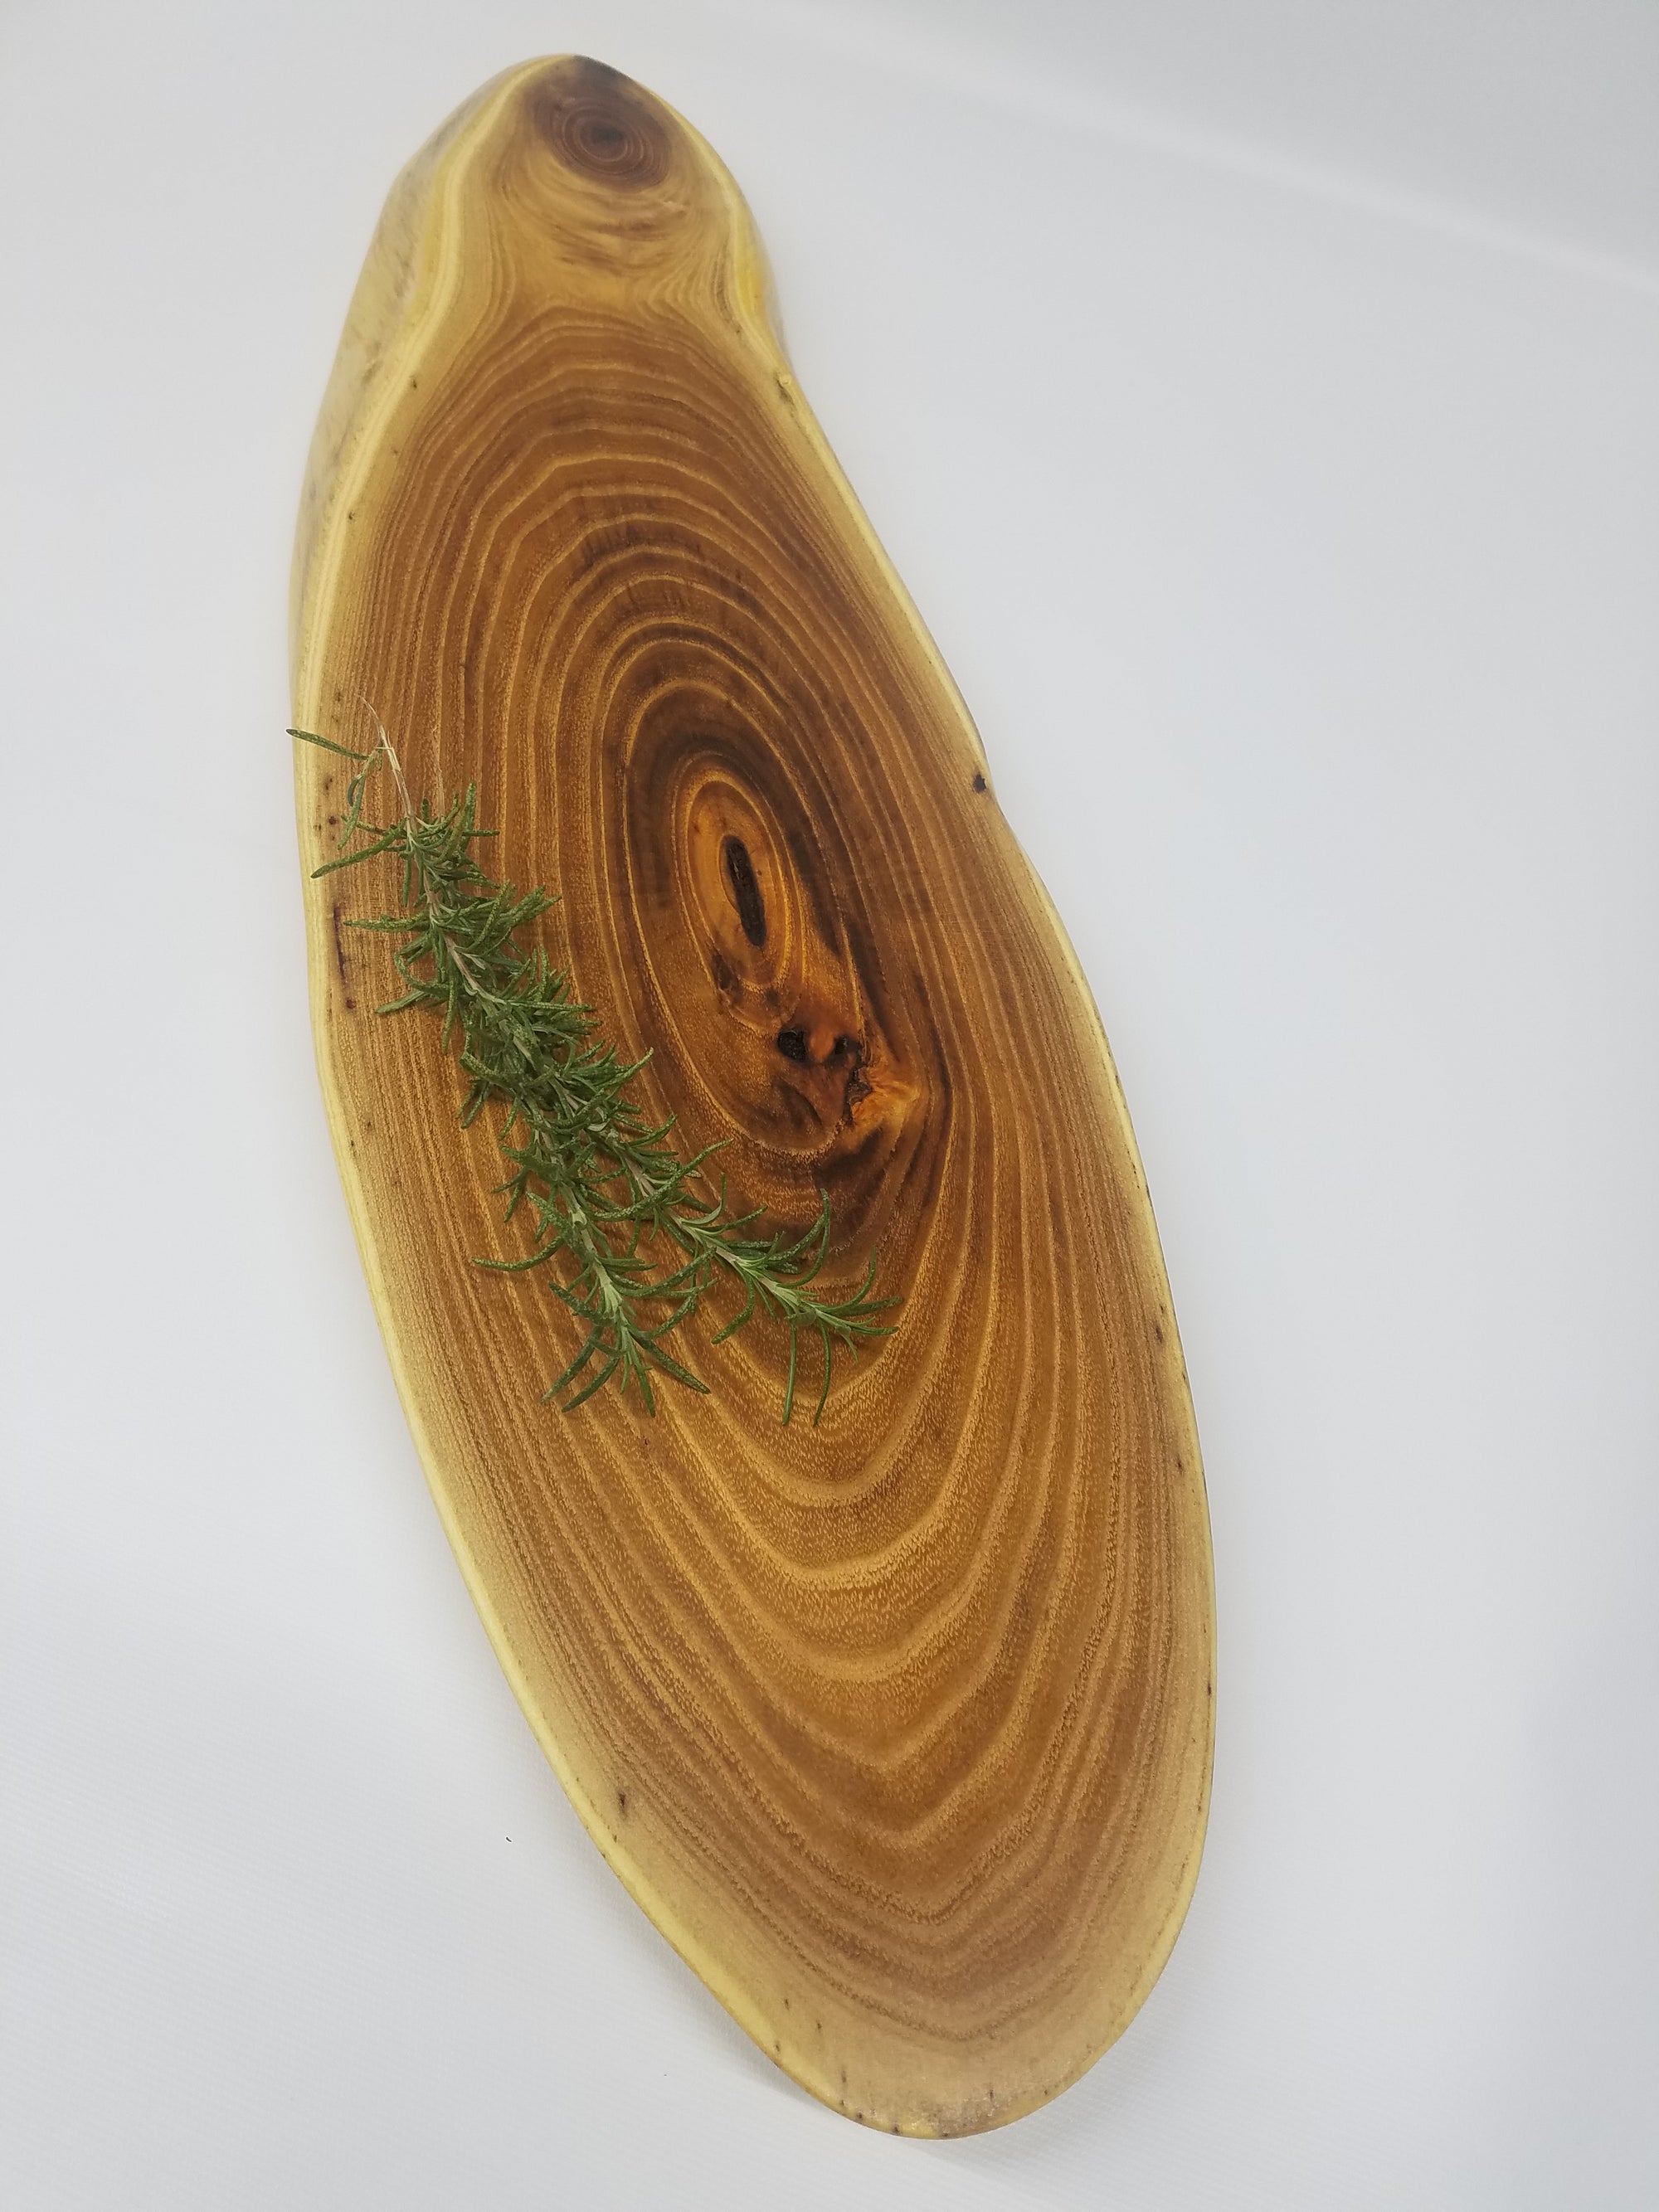 Live Edge Serving Platter- Large- Charcuterie Board- Table Centerpiece- Long and Narrow- Natural Wood- Serving Board- Food Safe- Tree Slice- Black Locust